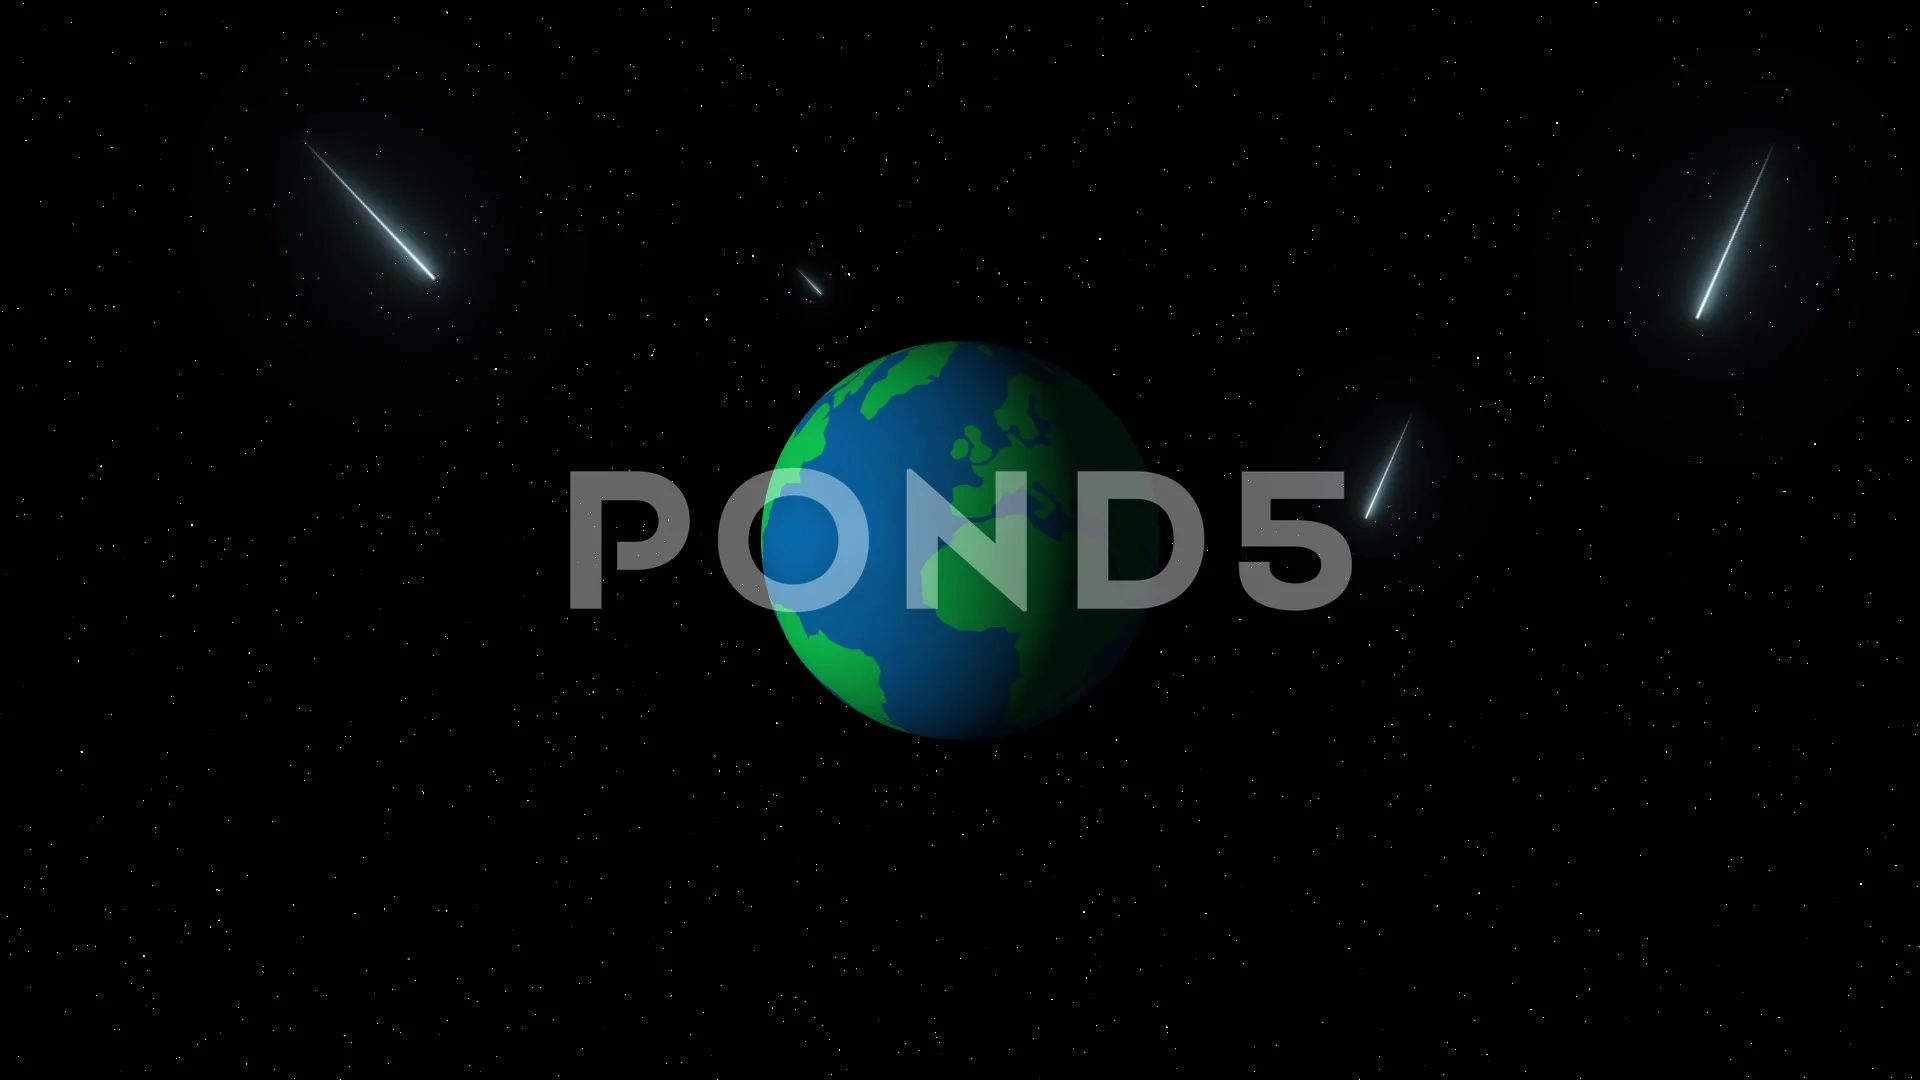 Earth Rotation Animation. Meteor shower ... | Stock Video | Pond5